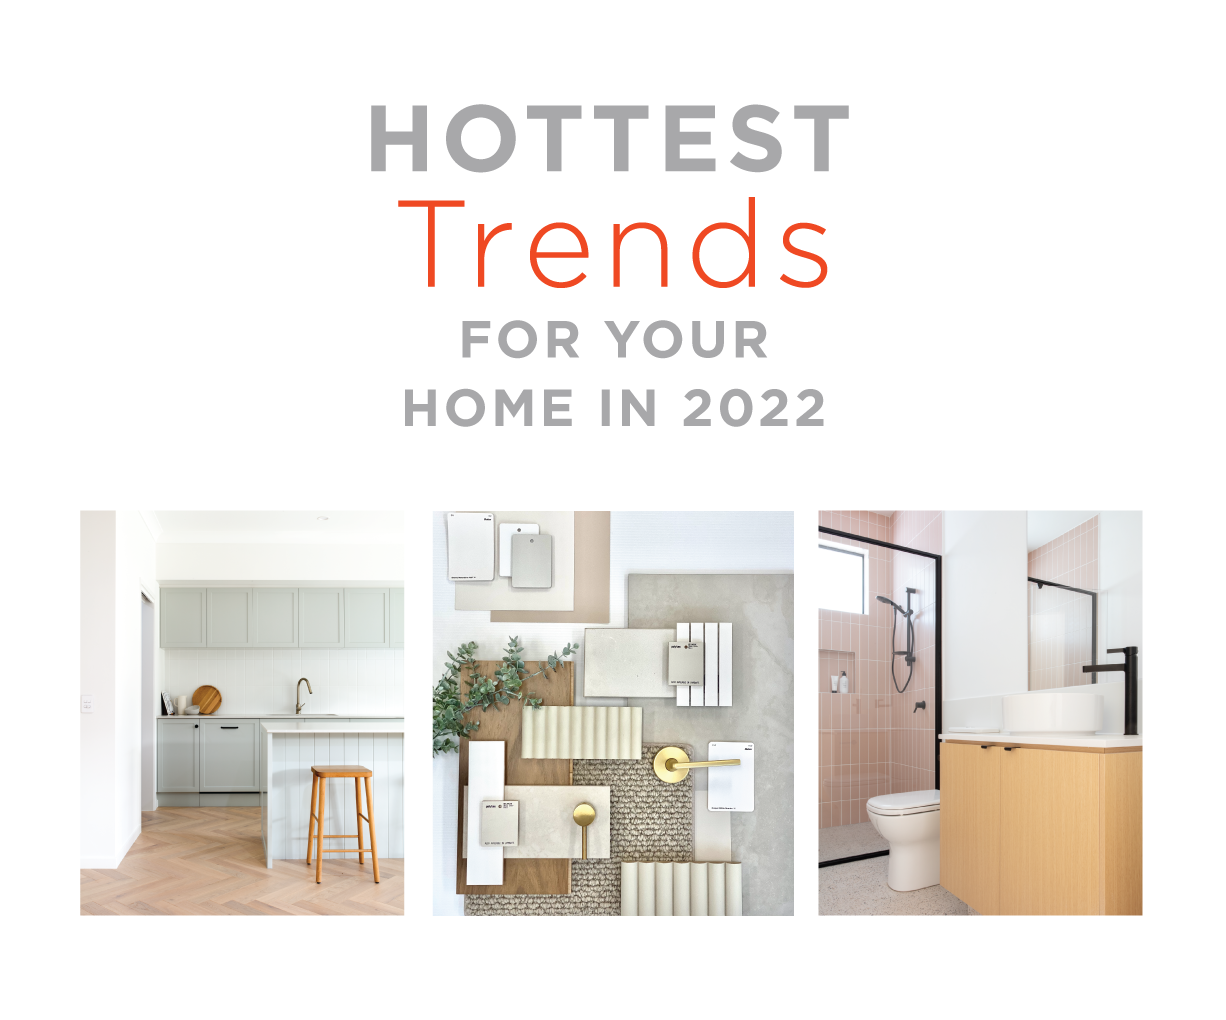 Hottest trends for your home in 2022